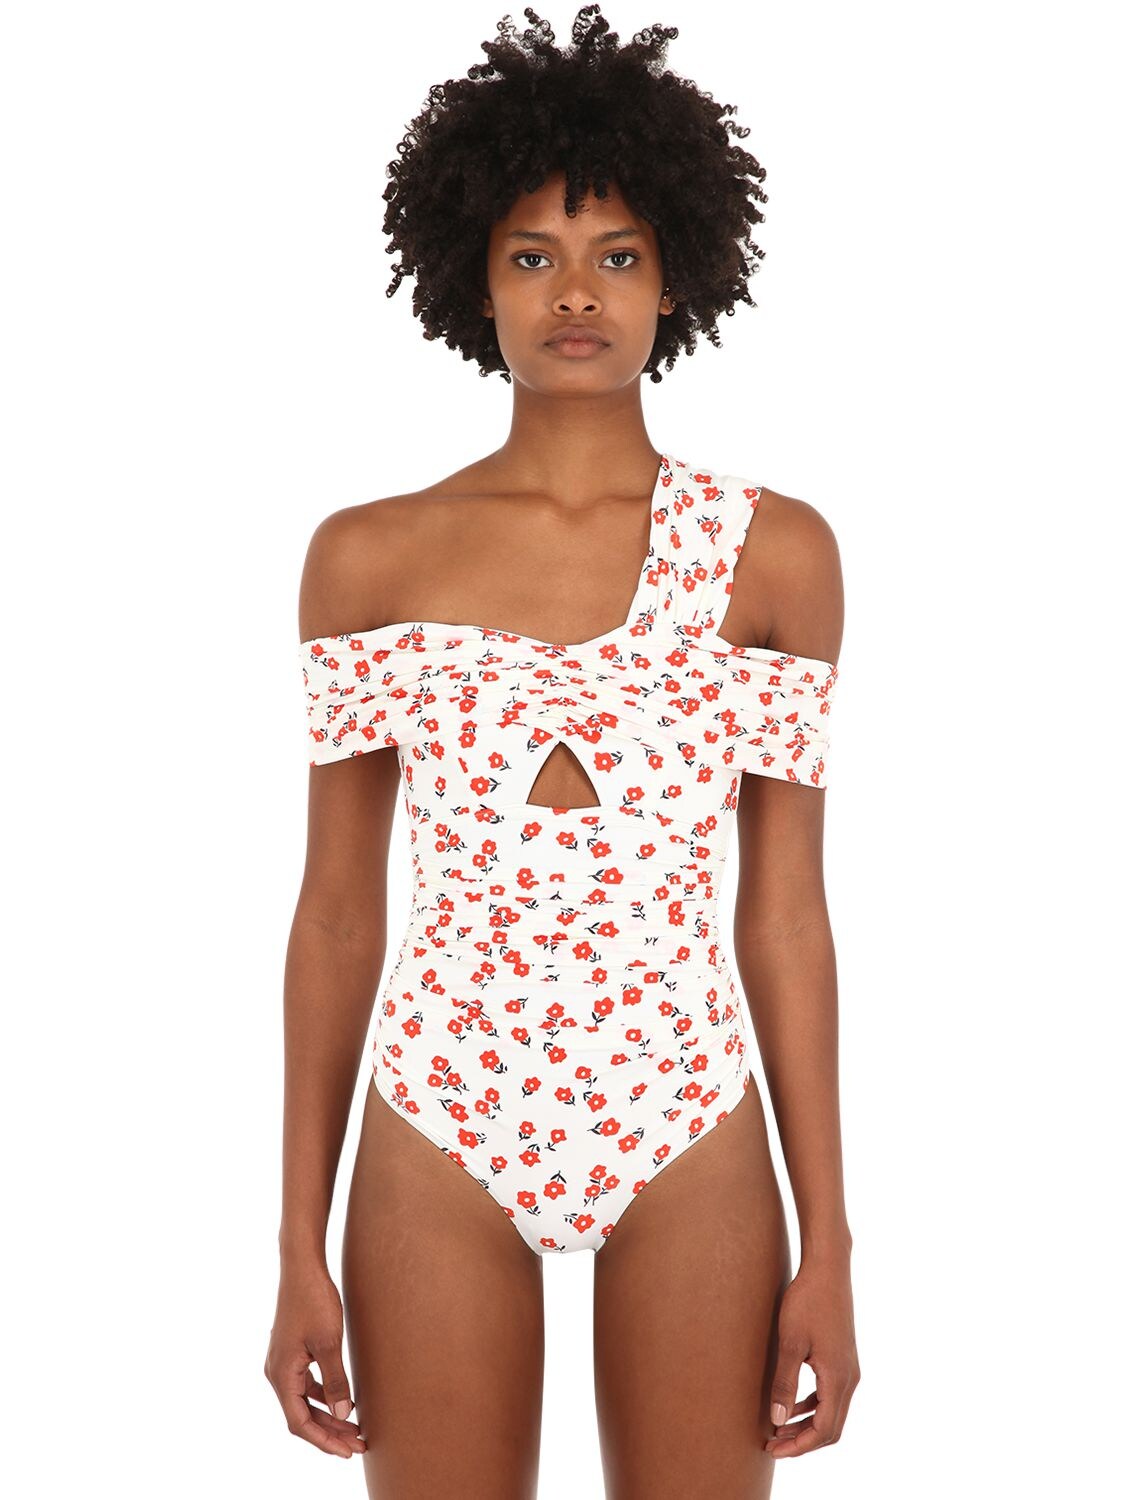 Draped Floral Print One Piece Swimsuit